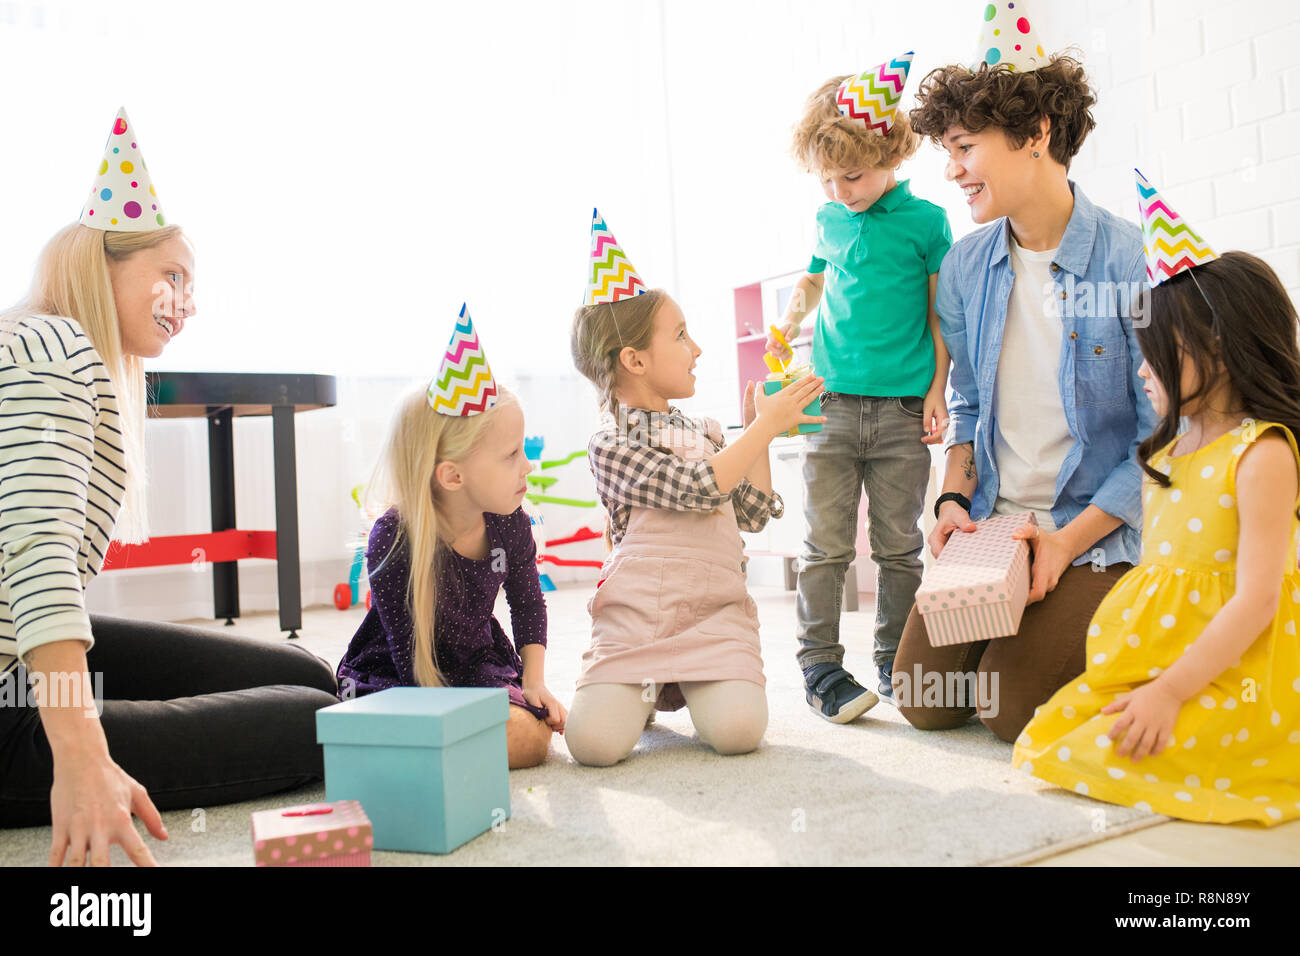 Young mothers playing with kids at birthday party Stock Photo